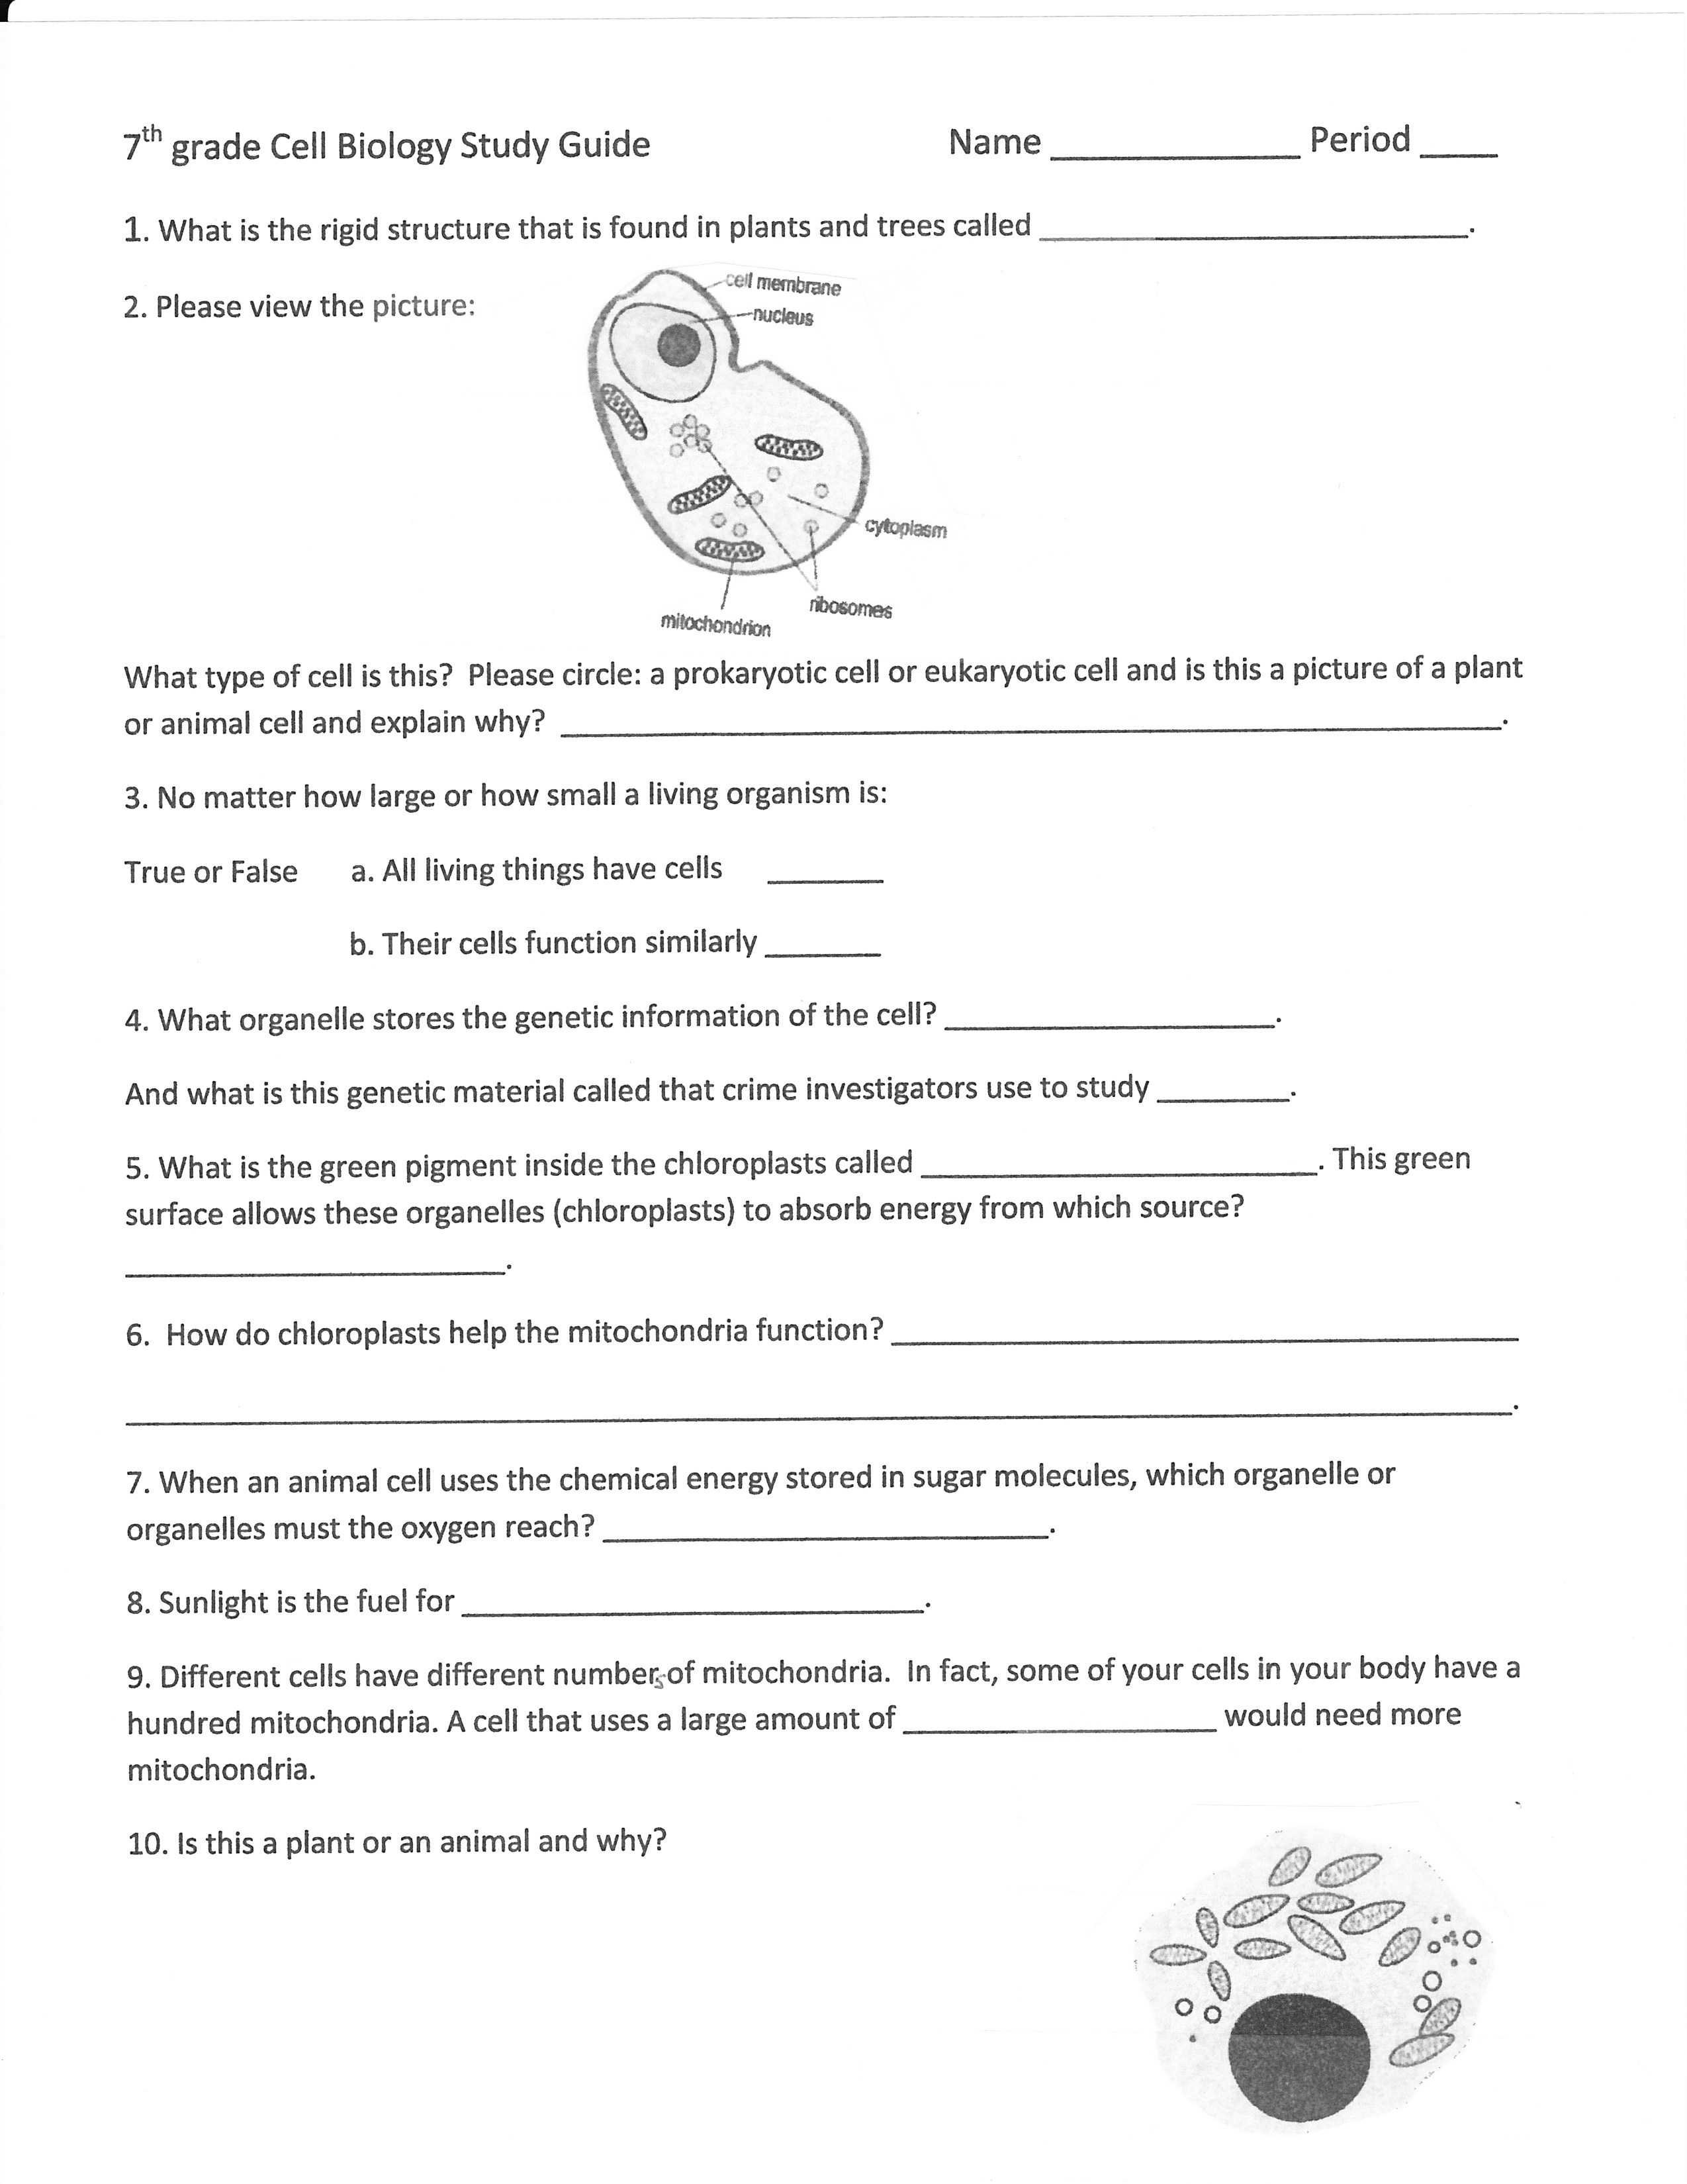 13 Best Images of 7th Grade Life Science Worksheets - Free ...